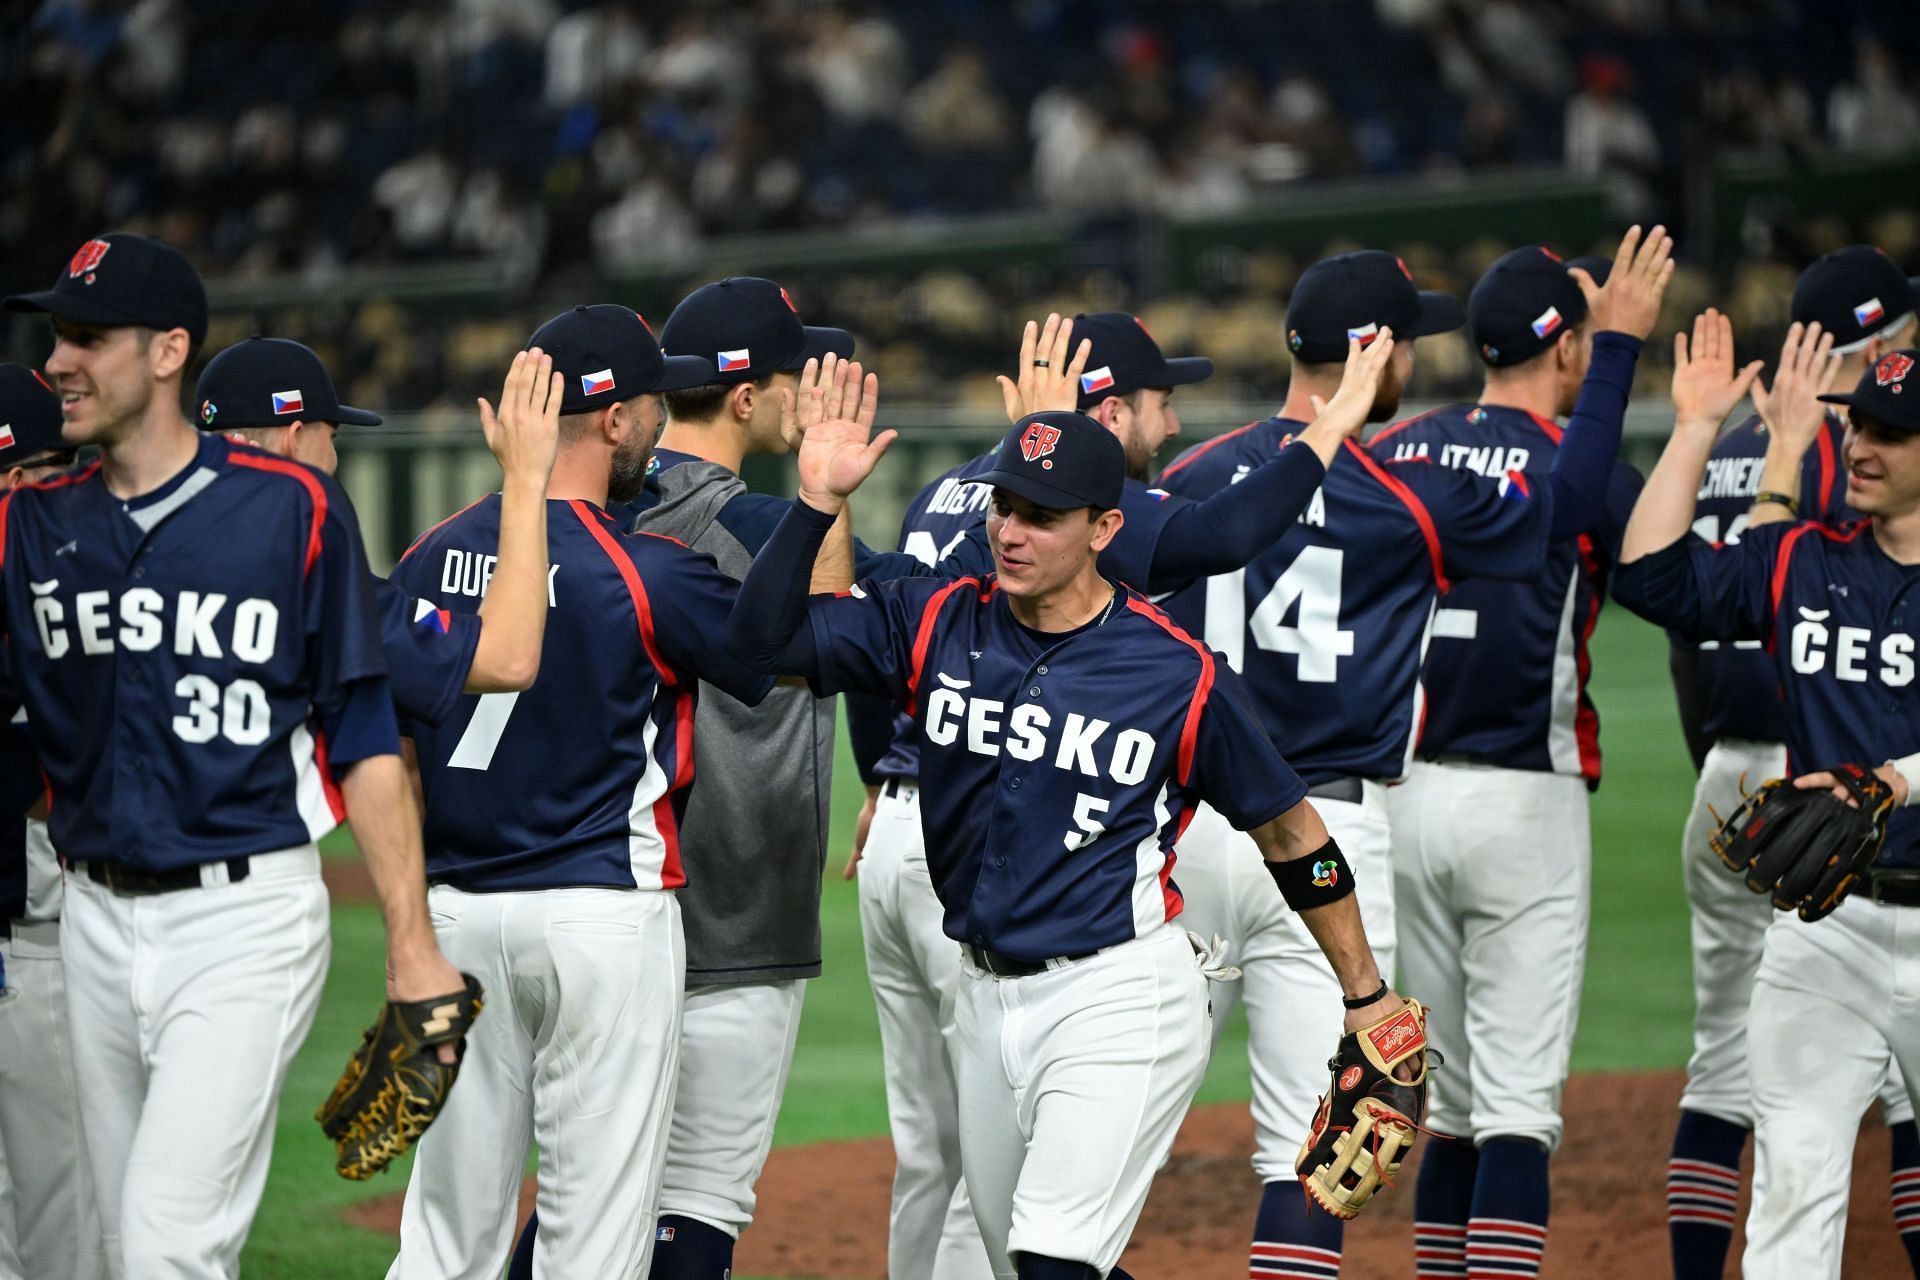 Czech Republic vs Japan WBC Live TV Listings, streaming options, and more